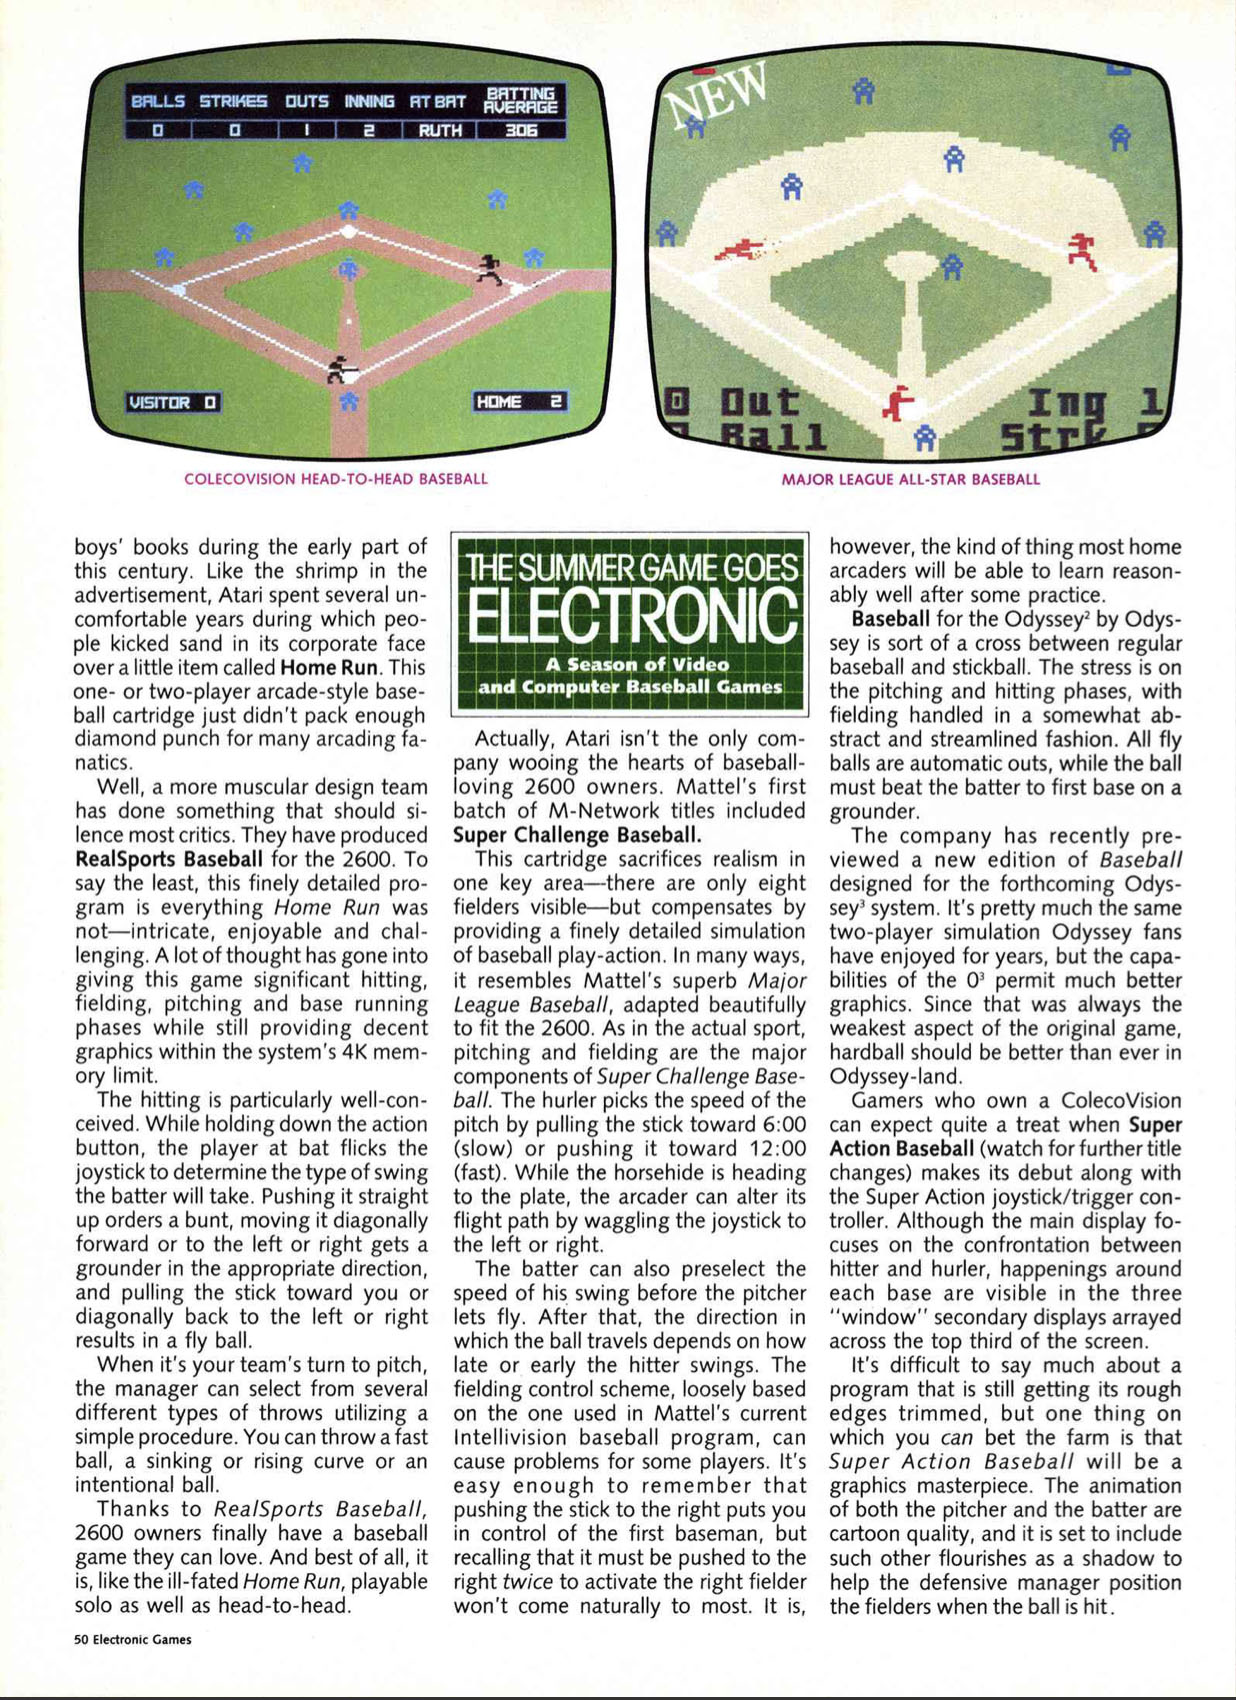 The Summer Game Goes Electronic, Electronic Games August 1983 page 50